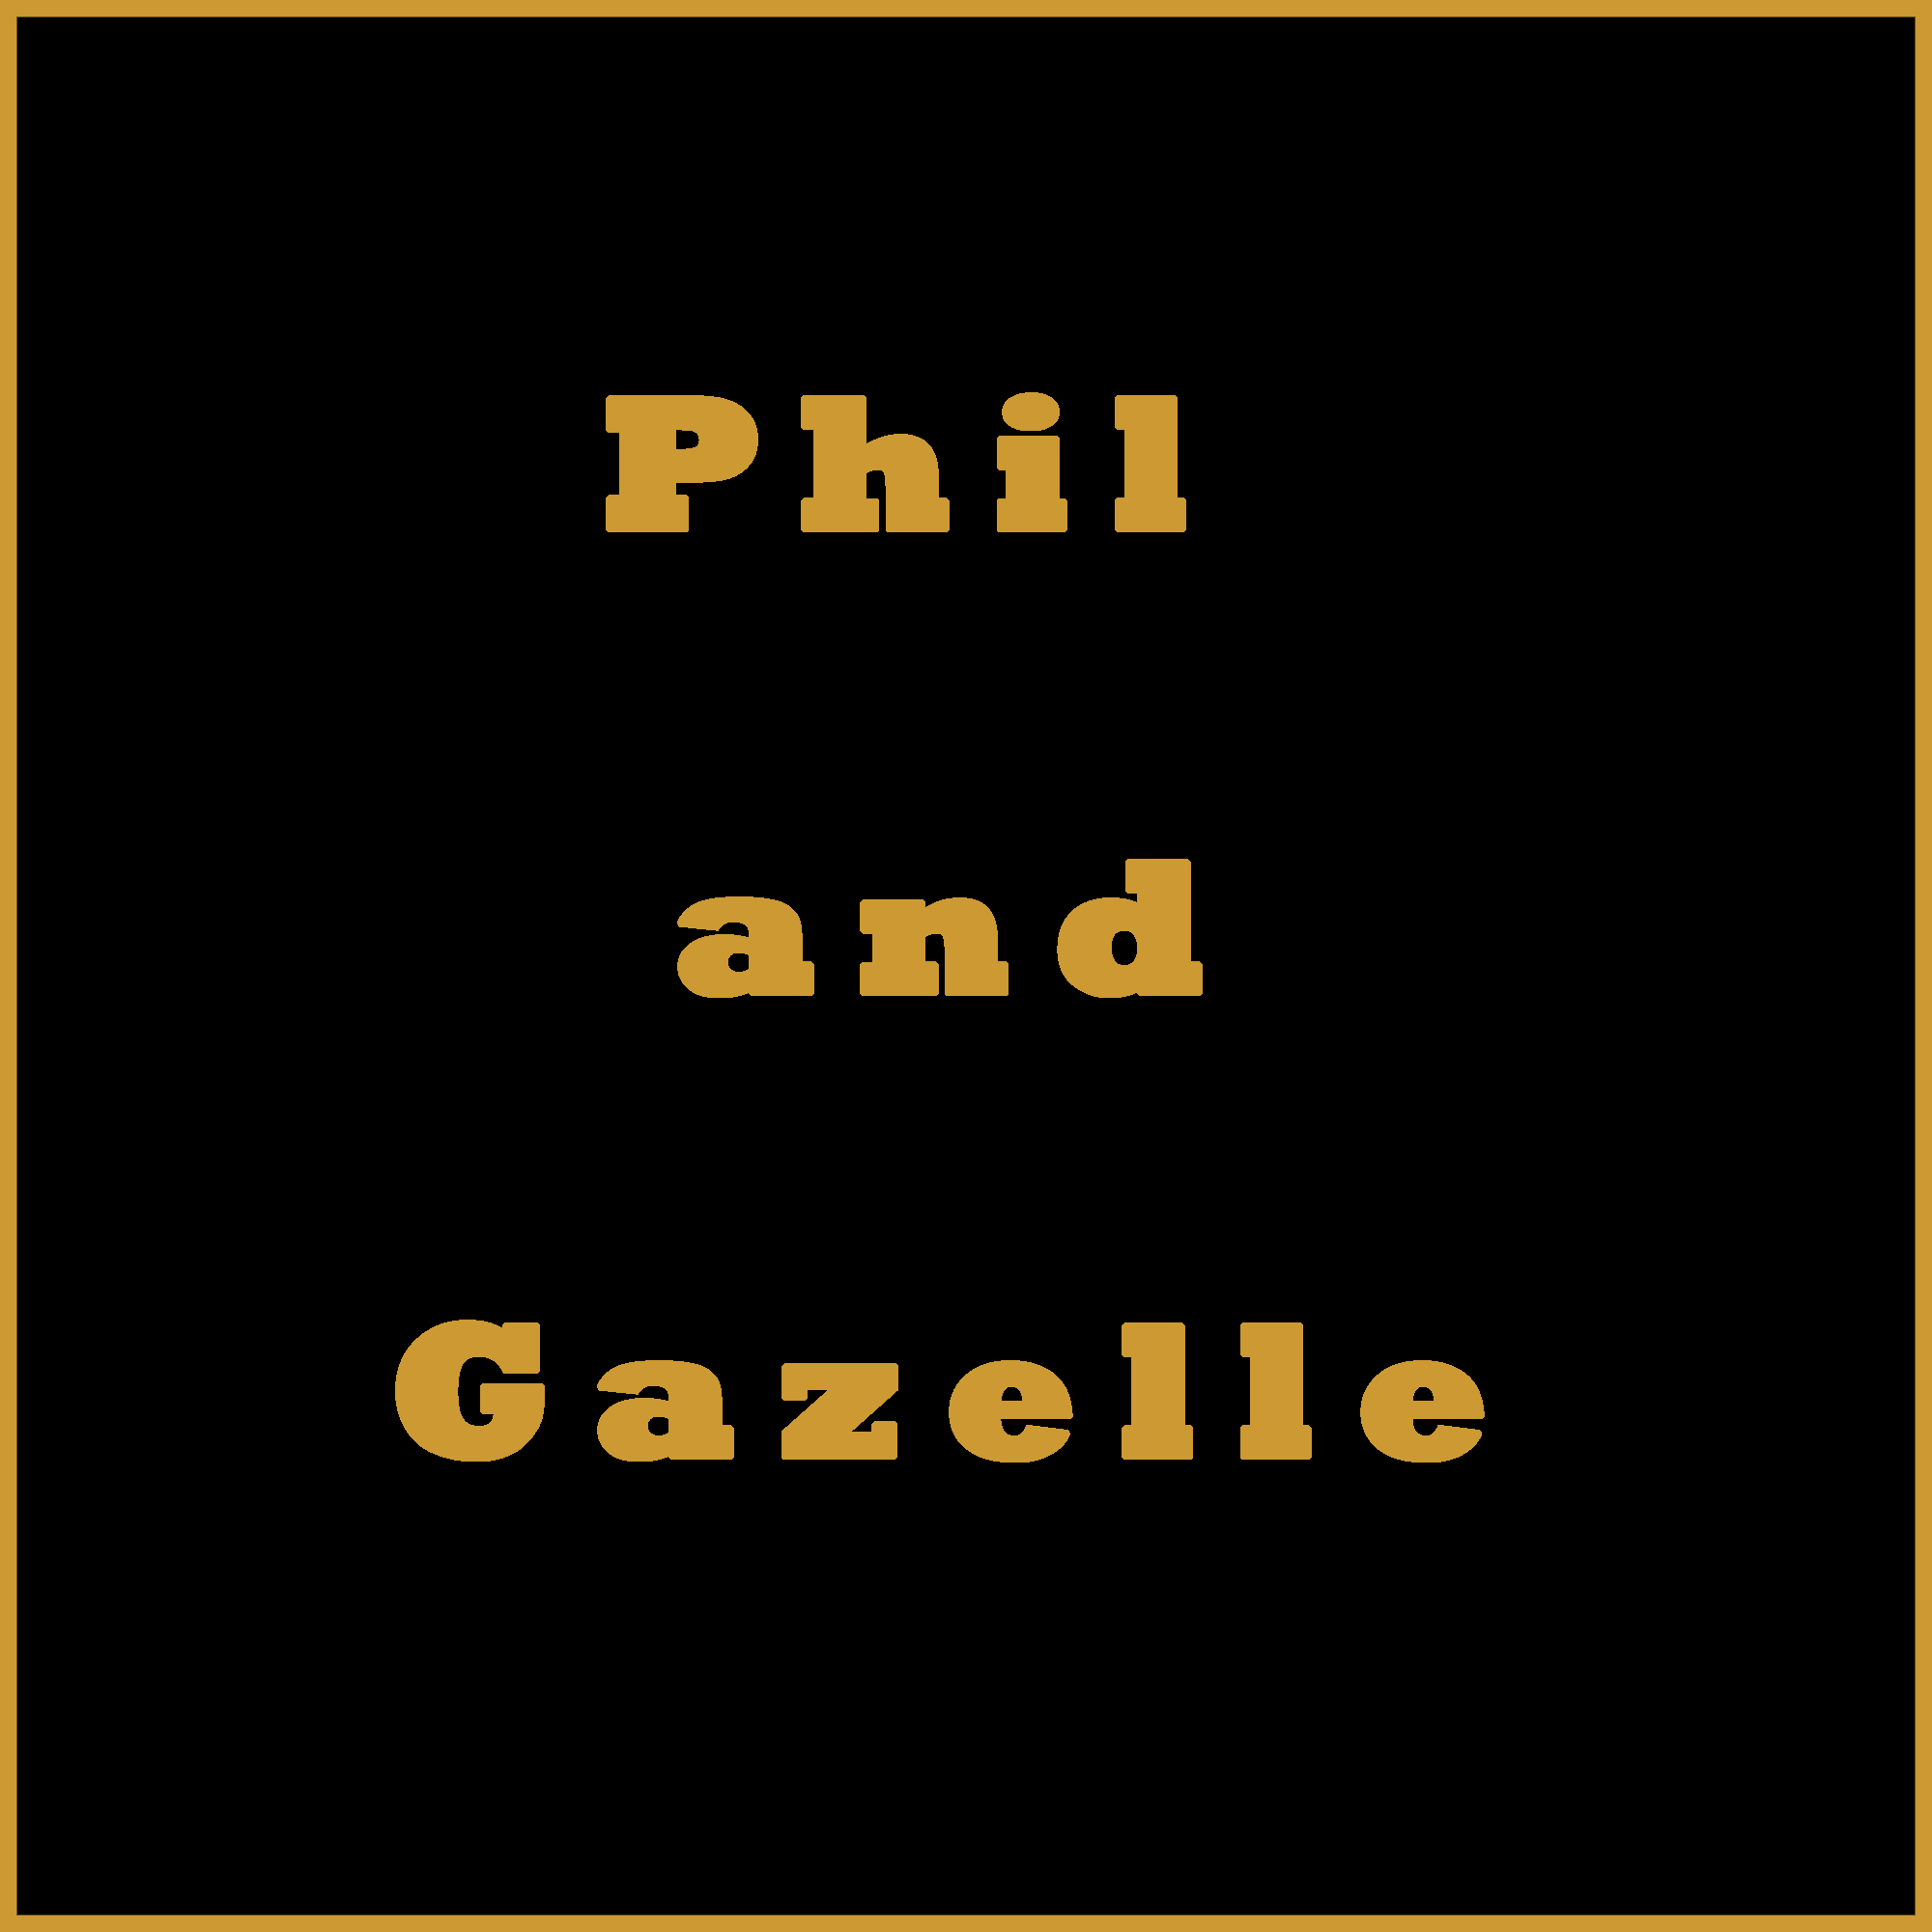 Phil and Gazelle 